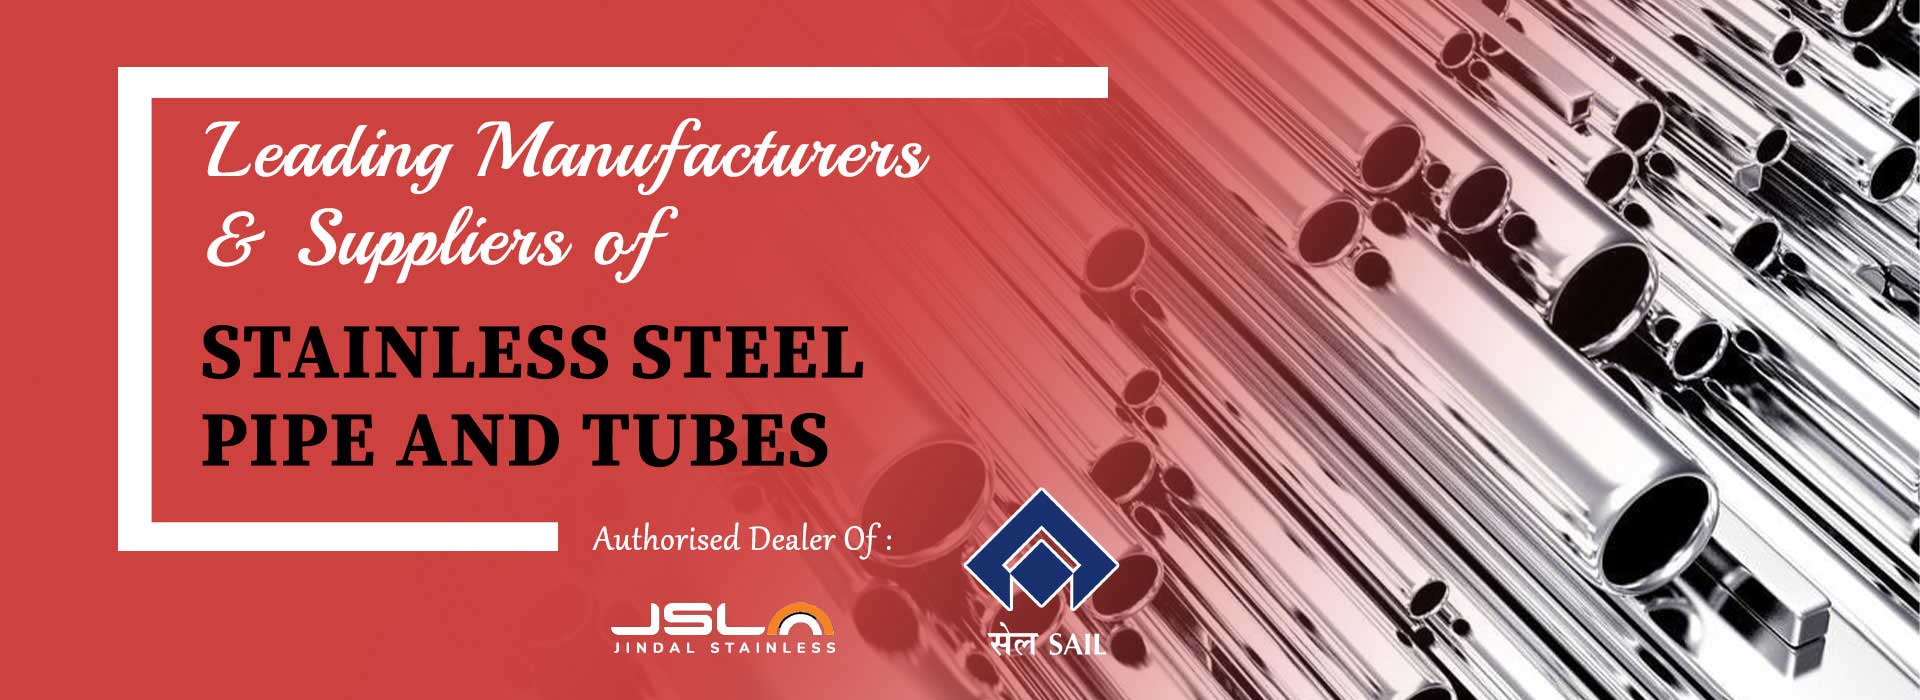 Stainless Steel Pipe and Tubes Manufacturers in Tamil Nadu